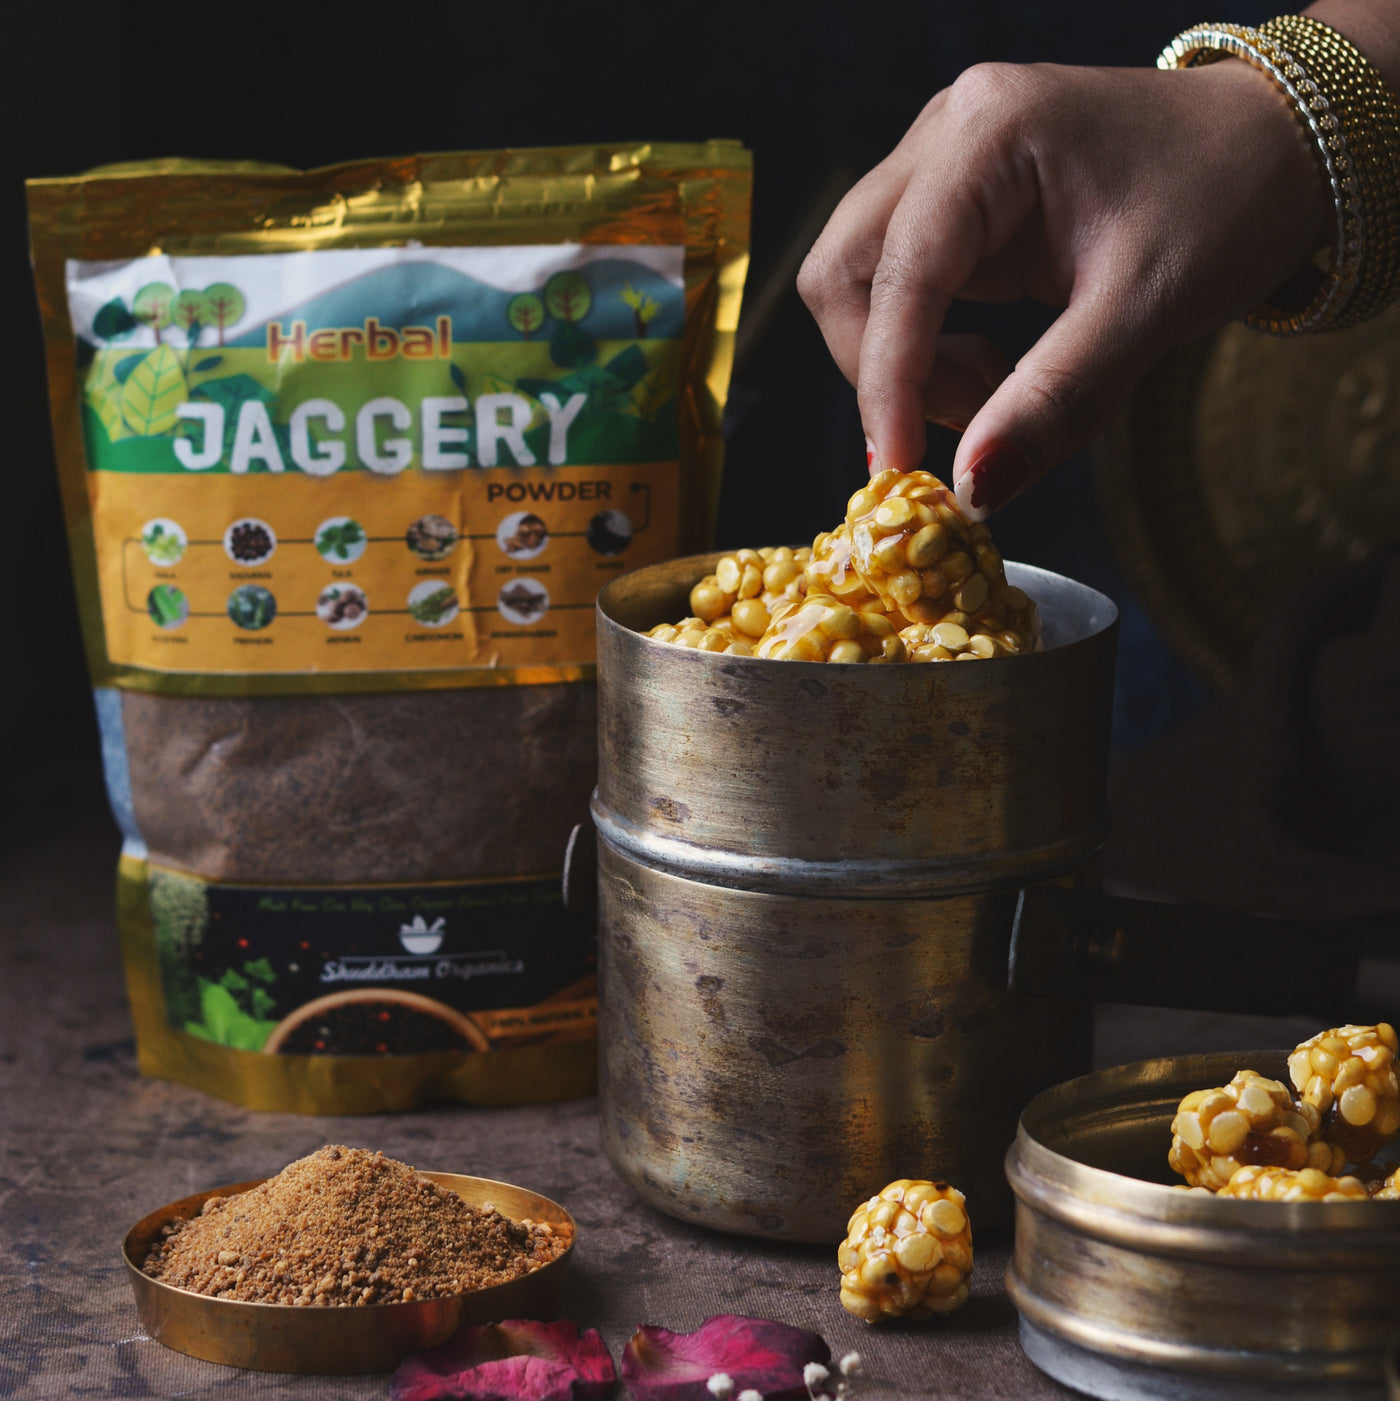 Shuddham Herbal Jaggery Powder with 11 Exquisite Herbs (500 Gms) Shipping: 30₹